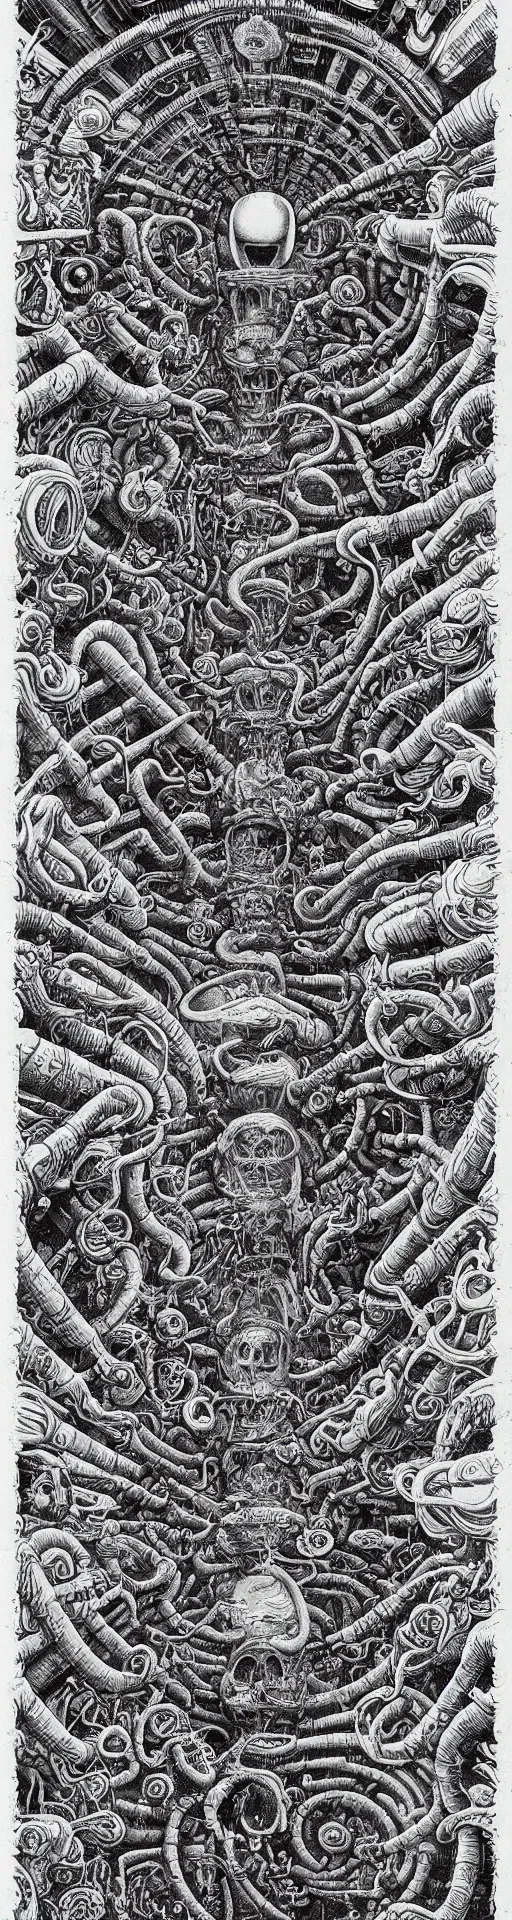 Prompt: astronauts and aliens and flying saucers dissolving into melted liquid braids, cubensis, aztec, basil wolverton, r crumb, hr giger, mc escher, dali, muted colors